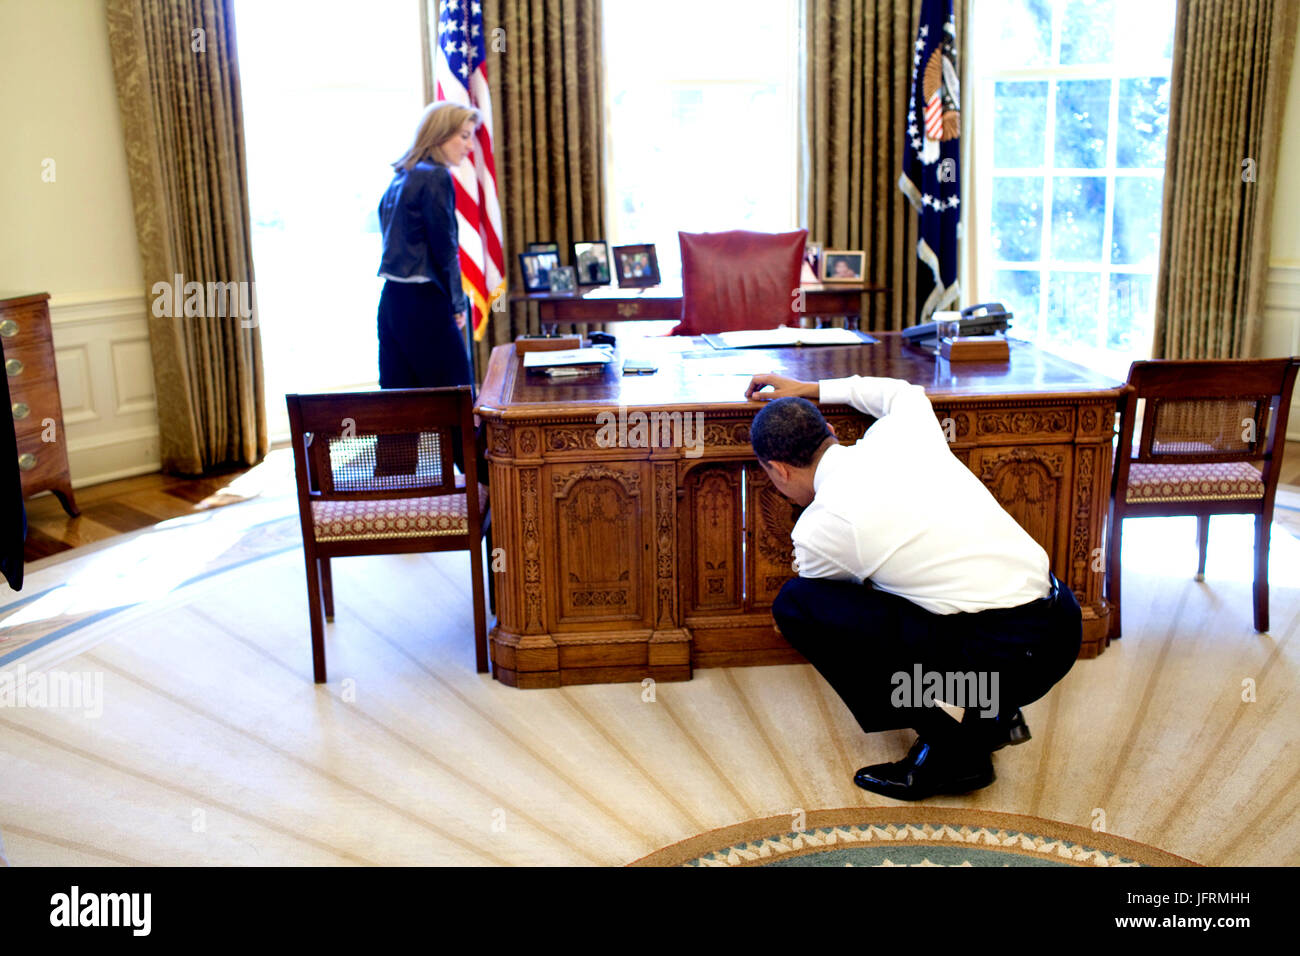 President Barack Obama examines  the Resolute Desk on March 3, 2009, while visiting with Caroline Kennedy Schlossberg in the Oval Office. In a famous photograph, her brother John F. Kennedy Jr., peeked through the FDR panel, while his father President Kennedy worked.  Official White House Photo by Pete Souza Stock Photo